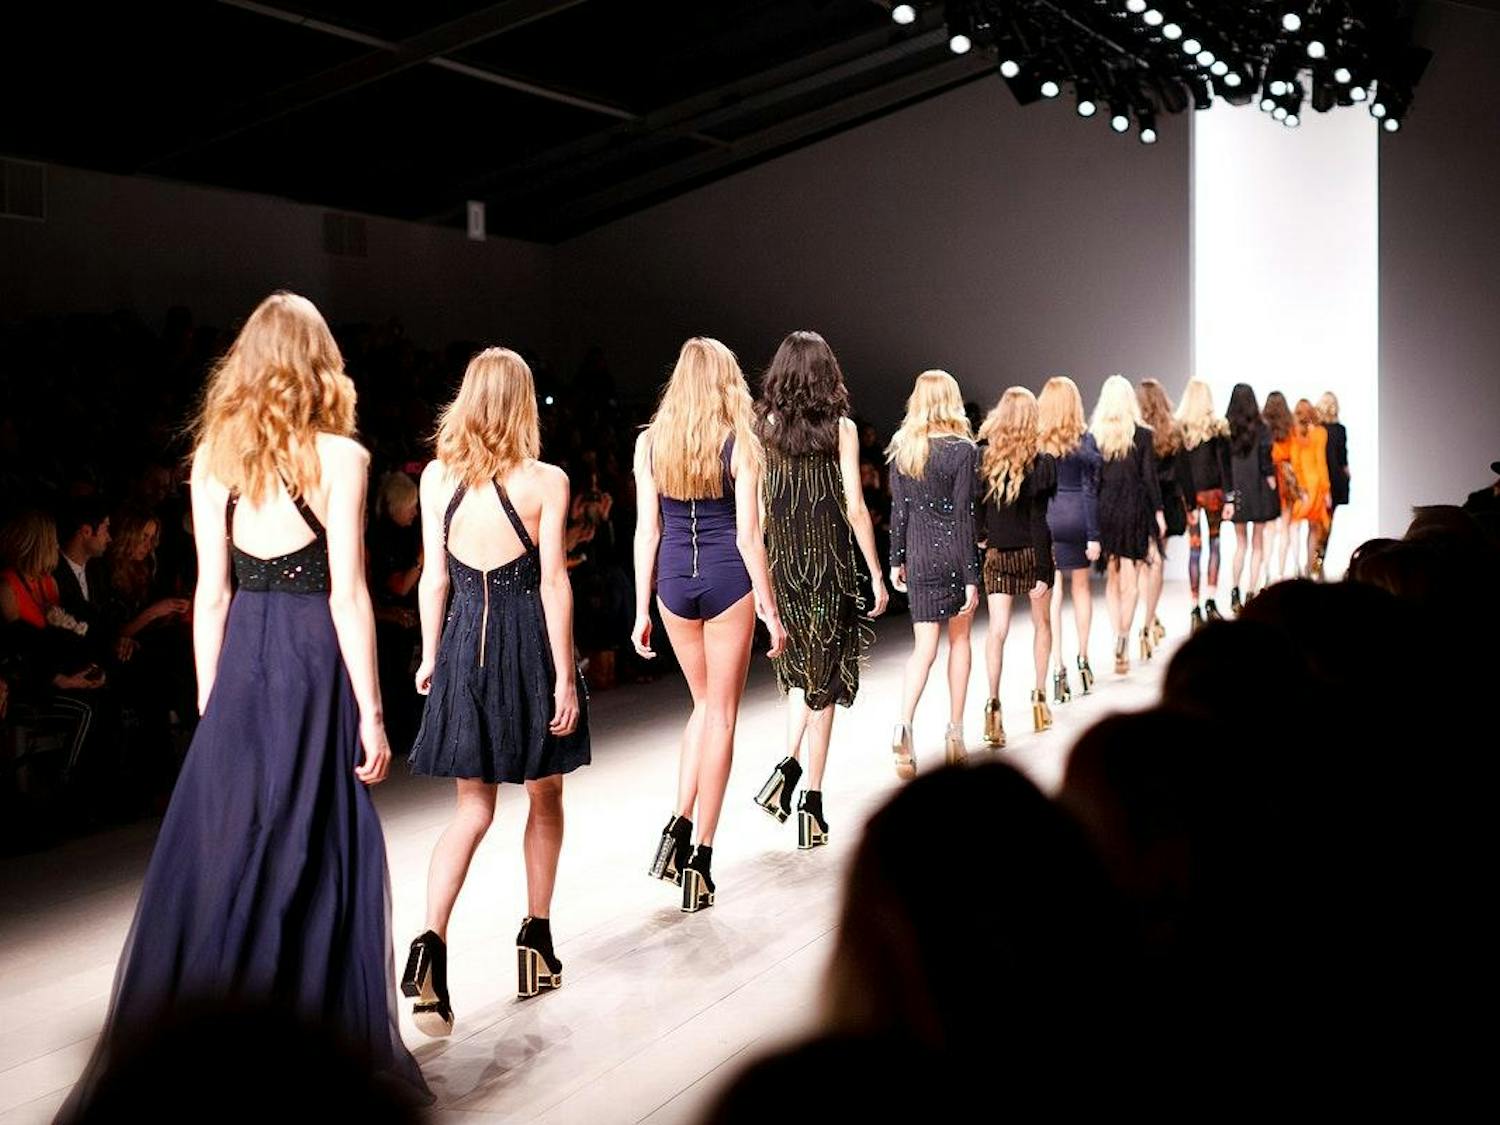 A long line of models on the catwalk.